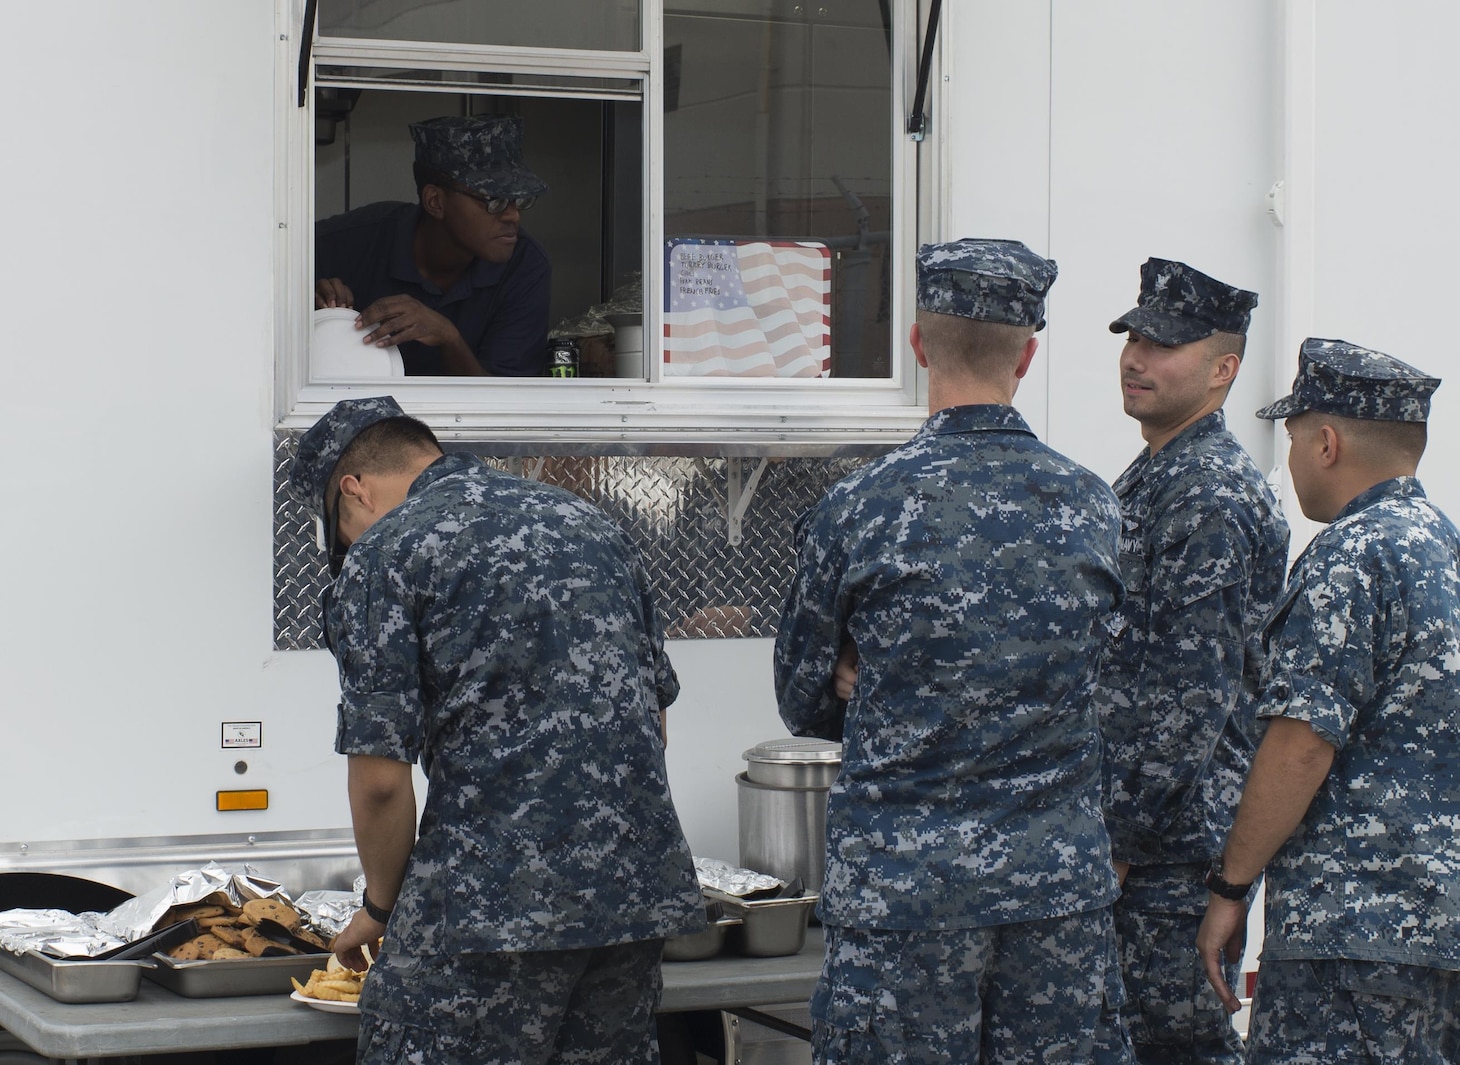 161014-N-KV911-044 PEARL HARBOR, Hawaii (Oct. 14, 2016) Sailor's stationed aboard the Los Angeles Class fast-attack submarine USS Columbus (SSN 762) order food at a mobile galley parked pierside. The mobile galley was recently purchased by Naval Submarine Support Command and is used to feed crews of boats undergoing galley maintenance.(U.S. Navy photo by Petty Officer 2nd Class Shaun Griffin/Released)